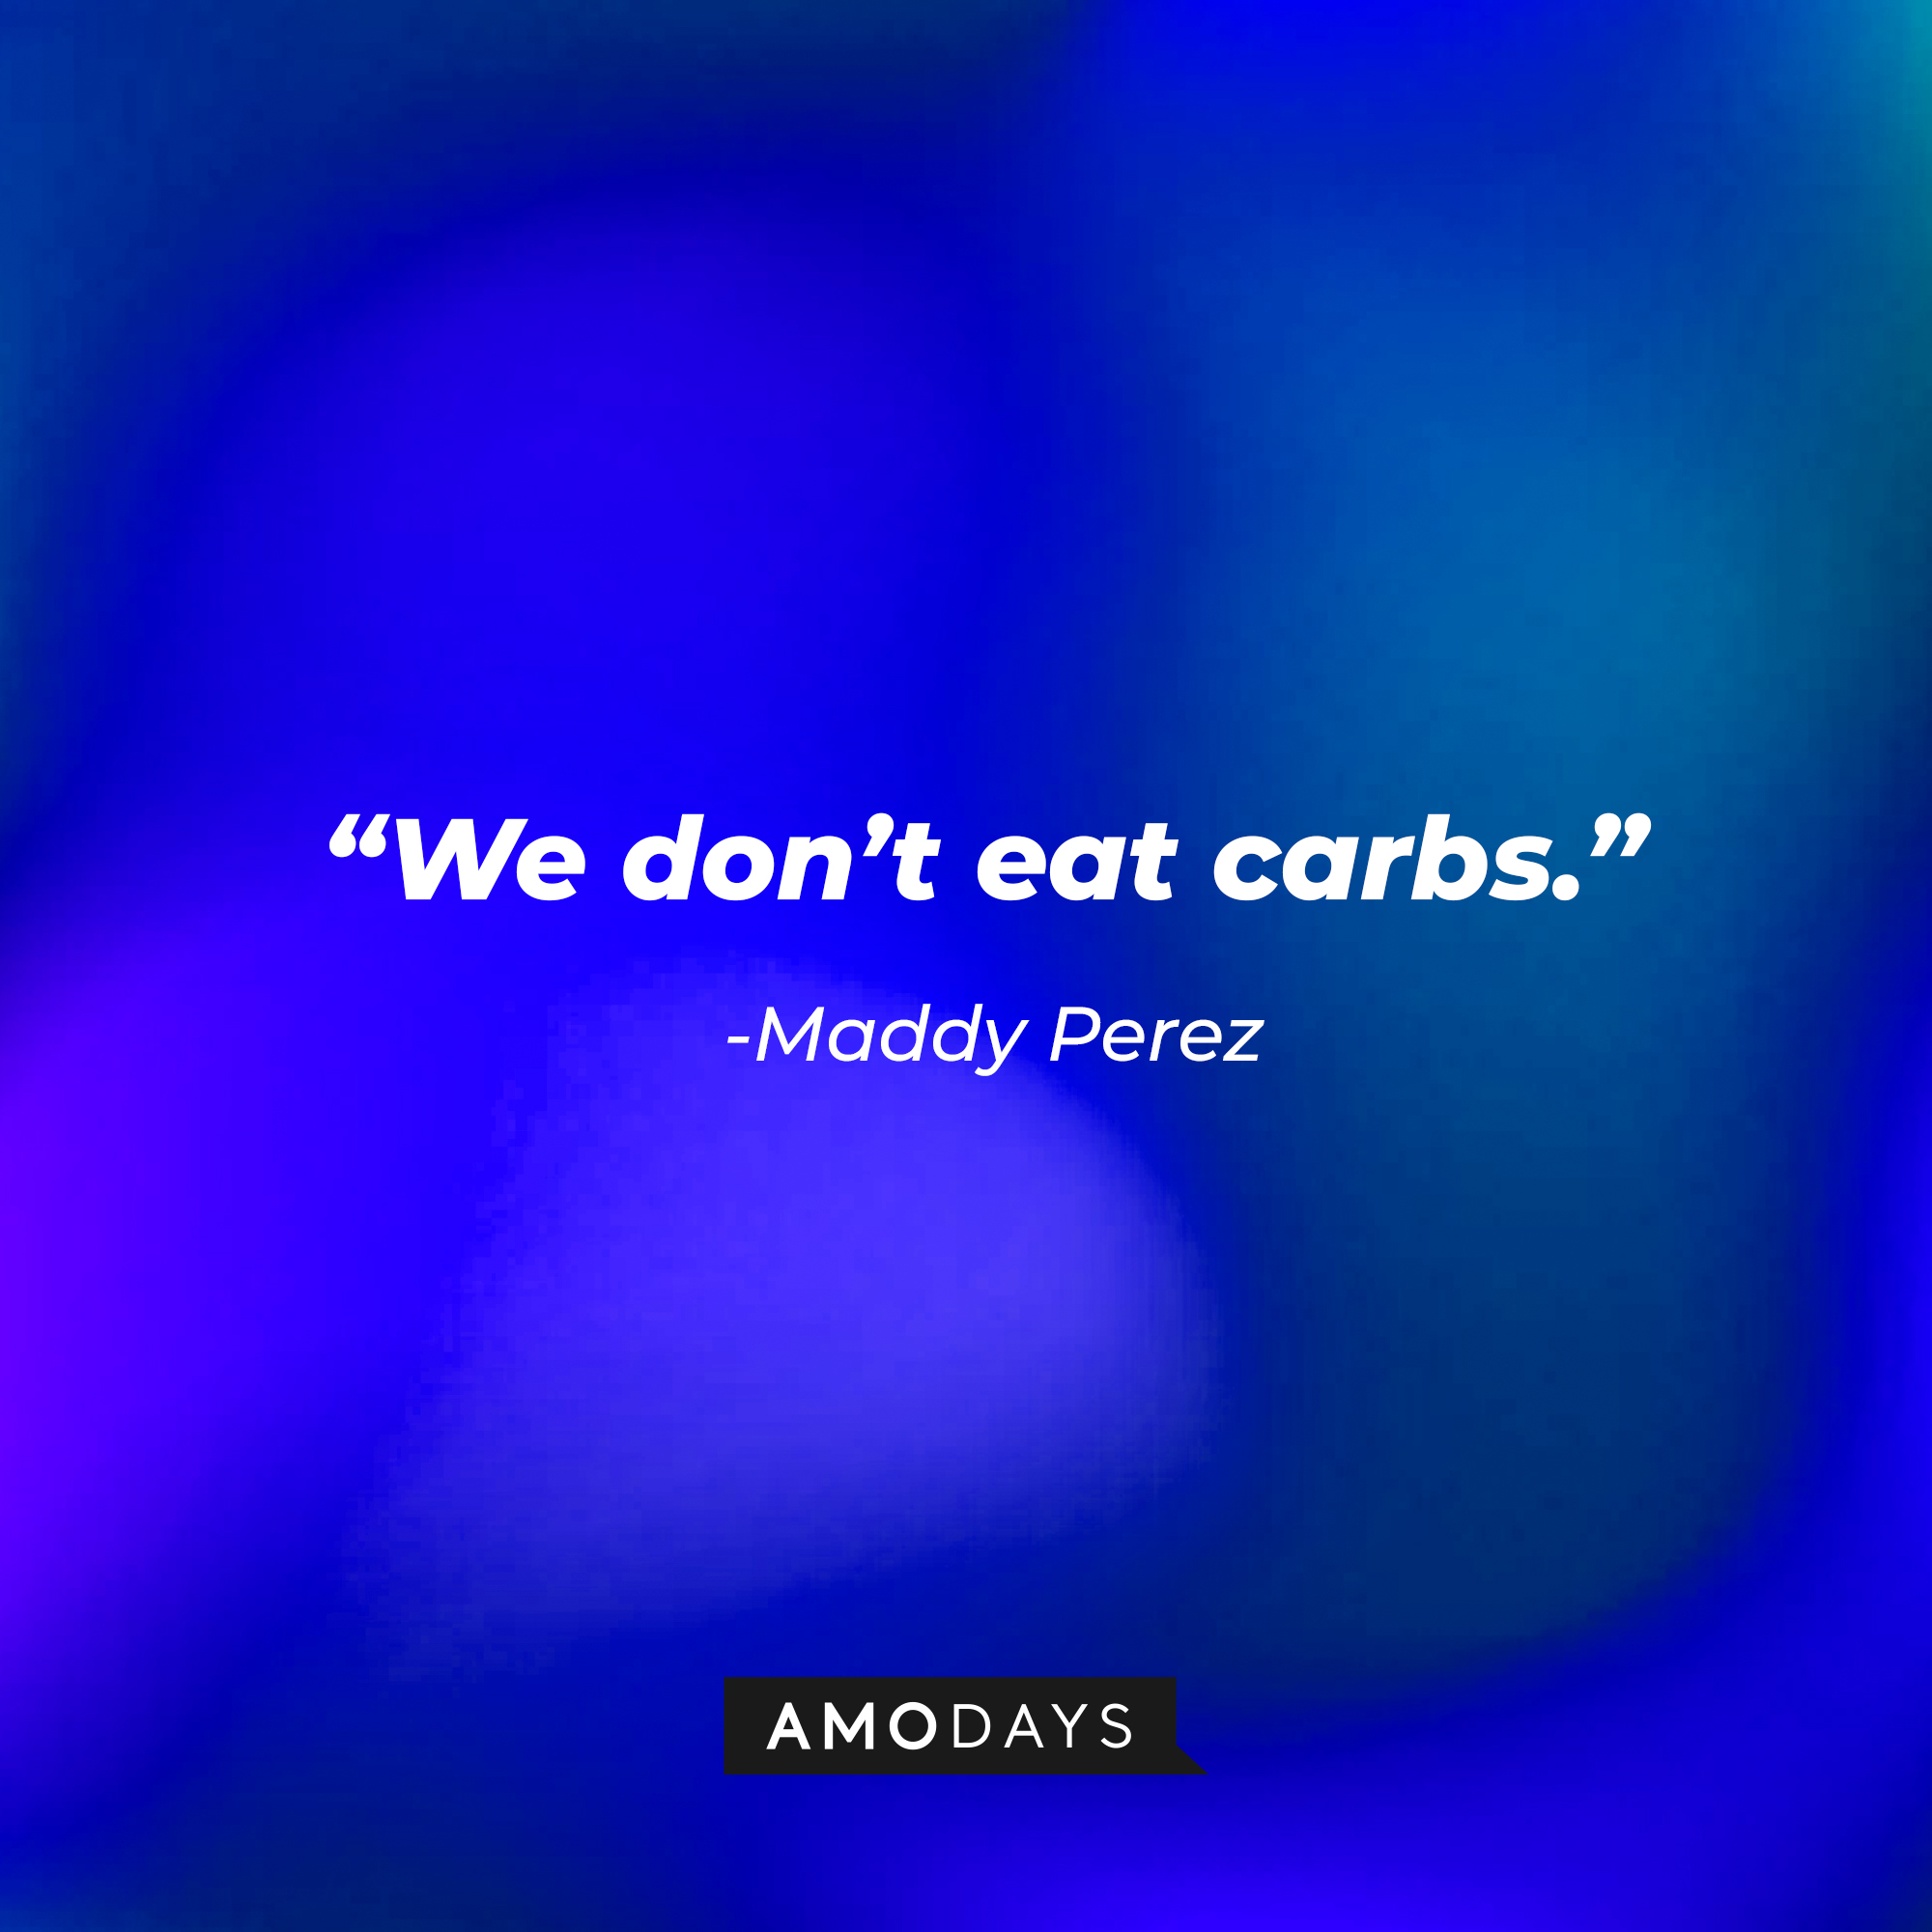 Maddy Perez’ quote: “We don’t eat carbs.” | Source: AmoDays